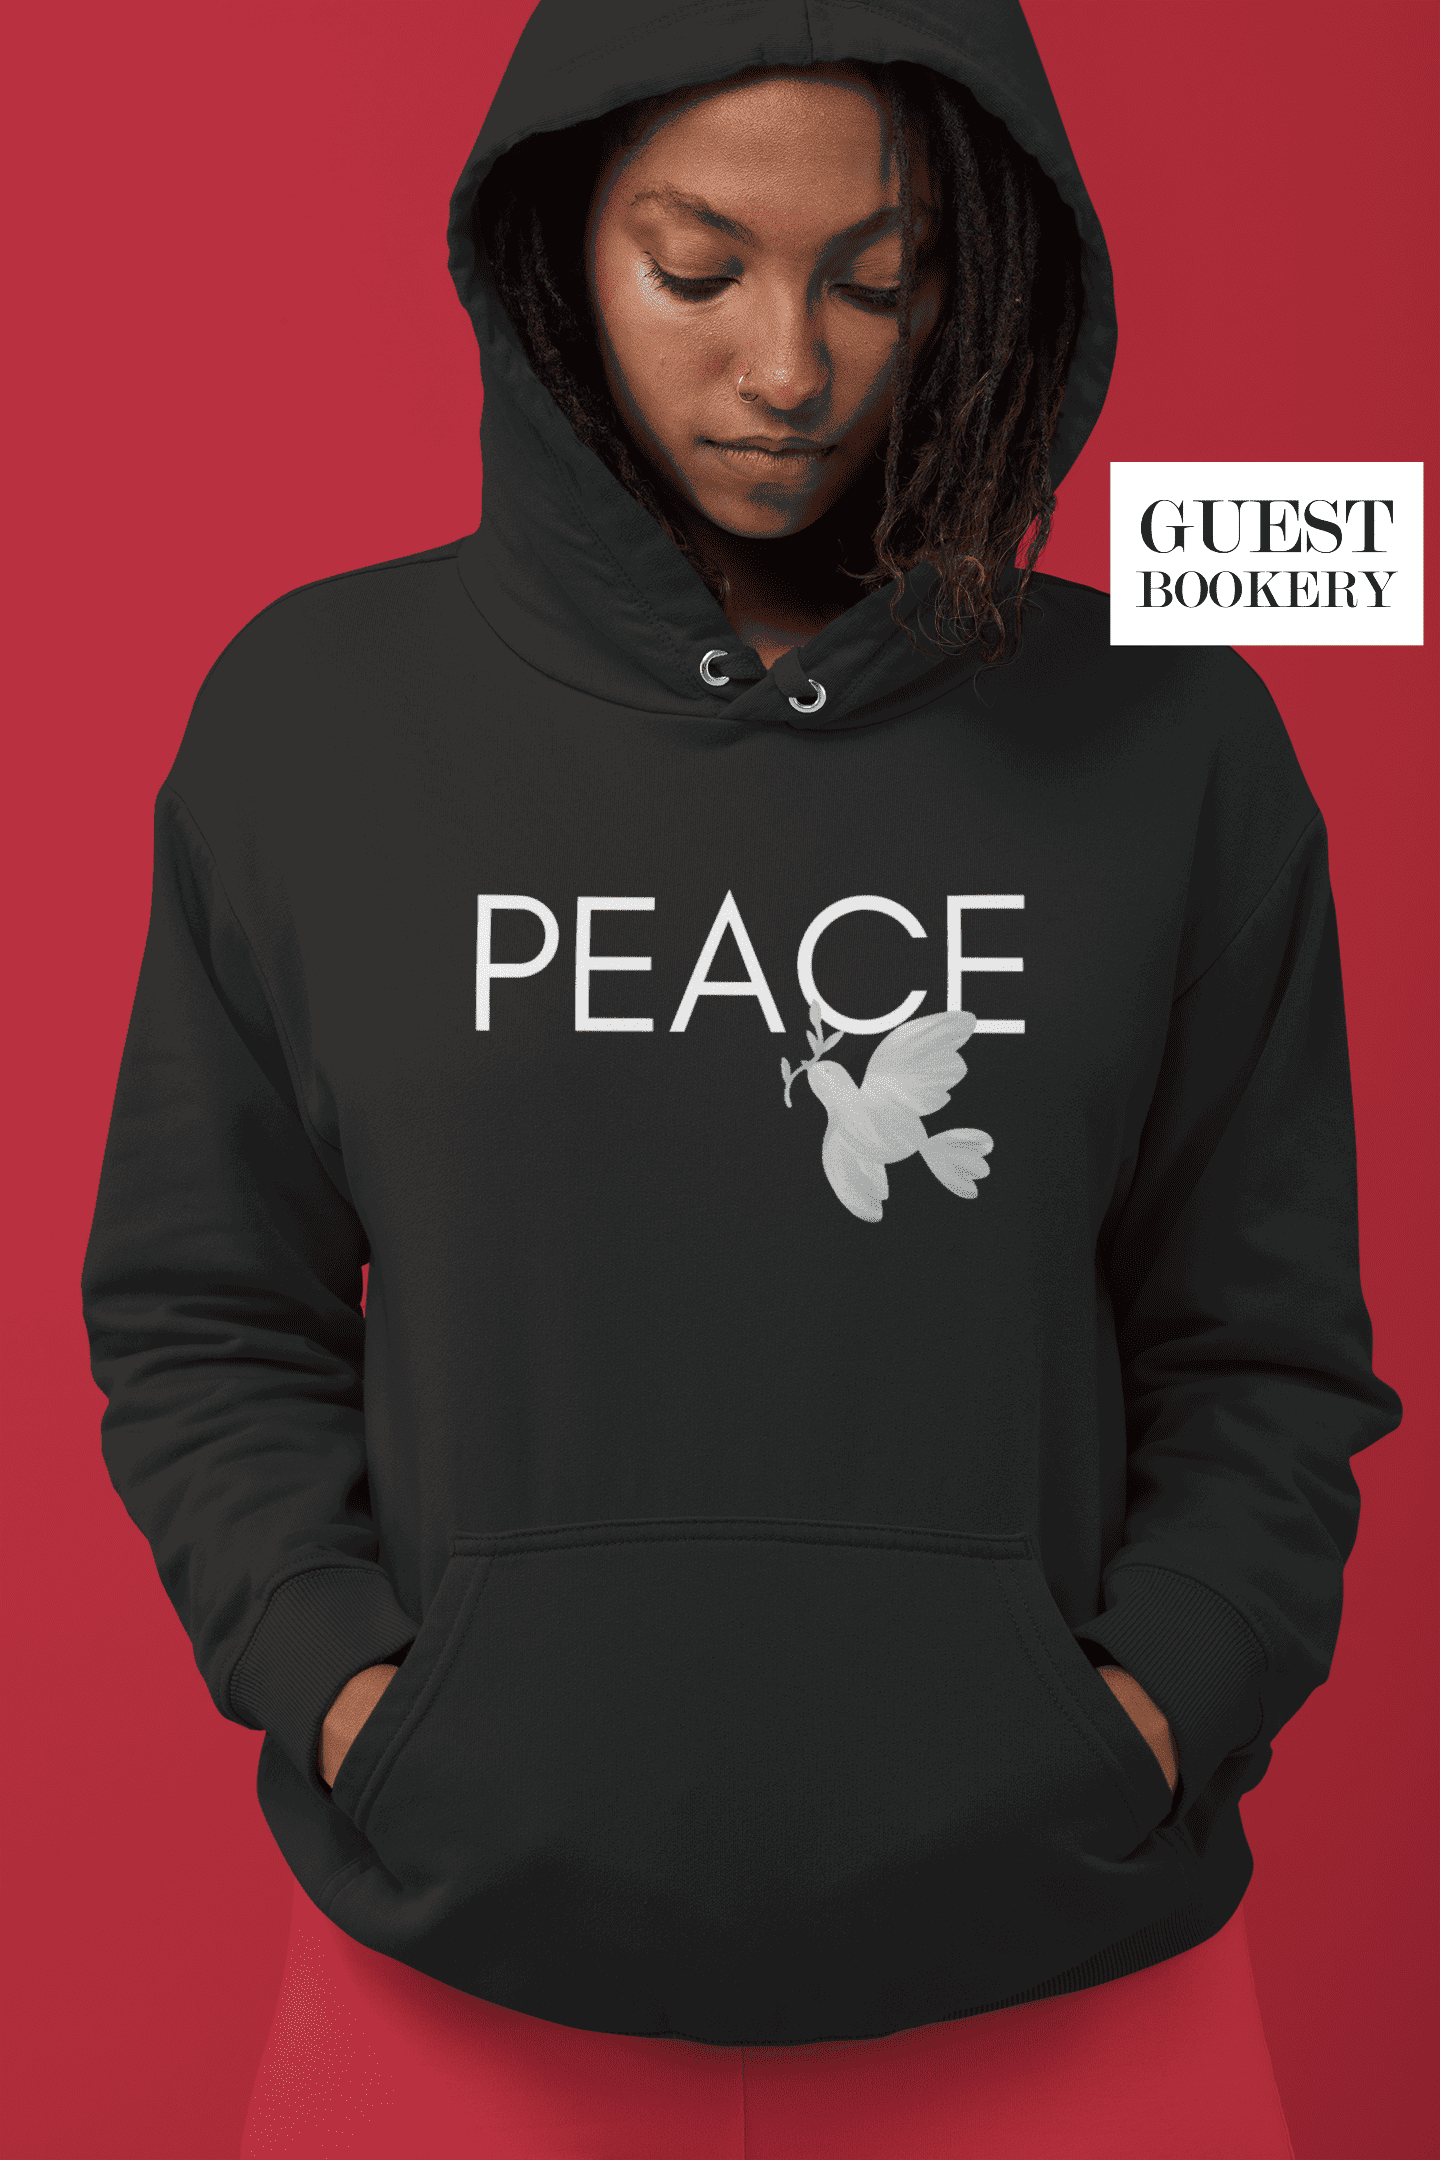 PEACE Hoodie - 100% of profits will be donated to support Gaza relief efforts